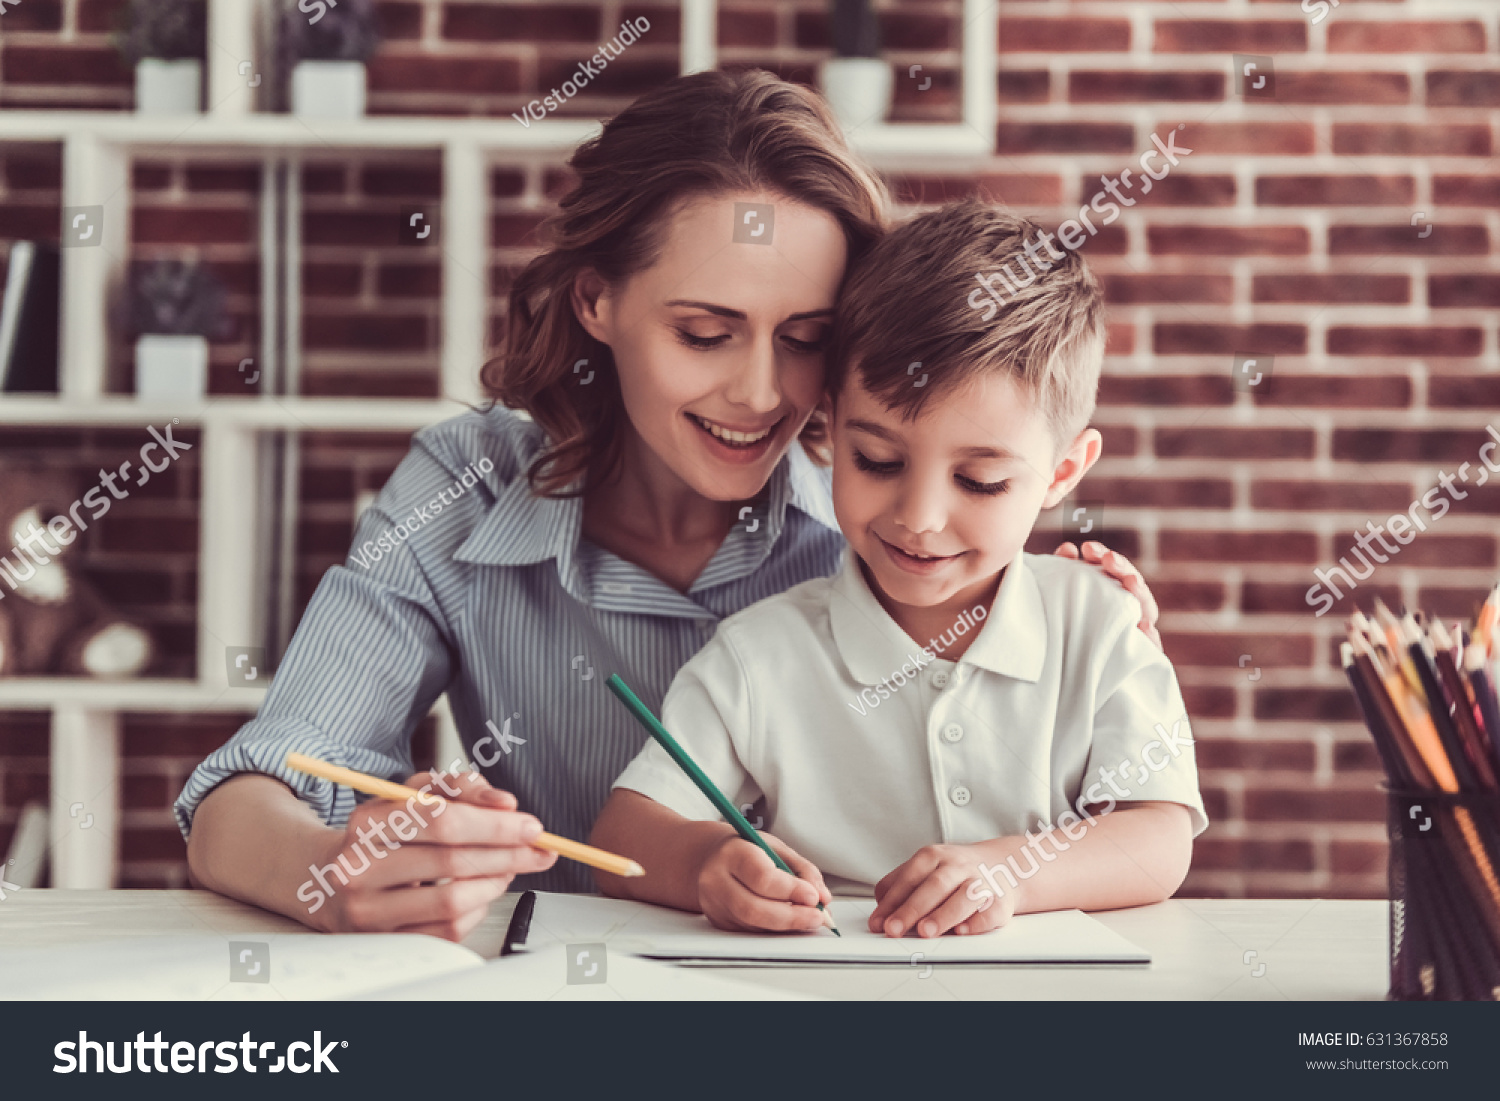 Beautiful business woman and her cute little son are drawing and smiling while sitting in office #631367858